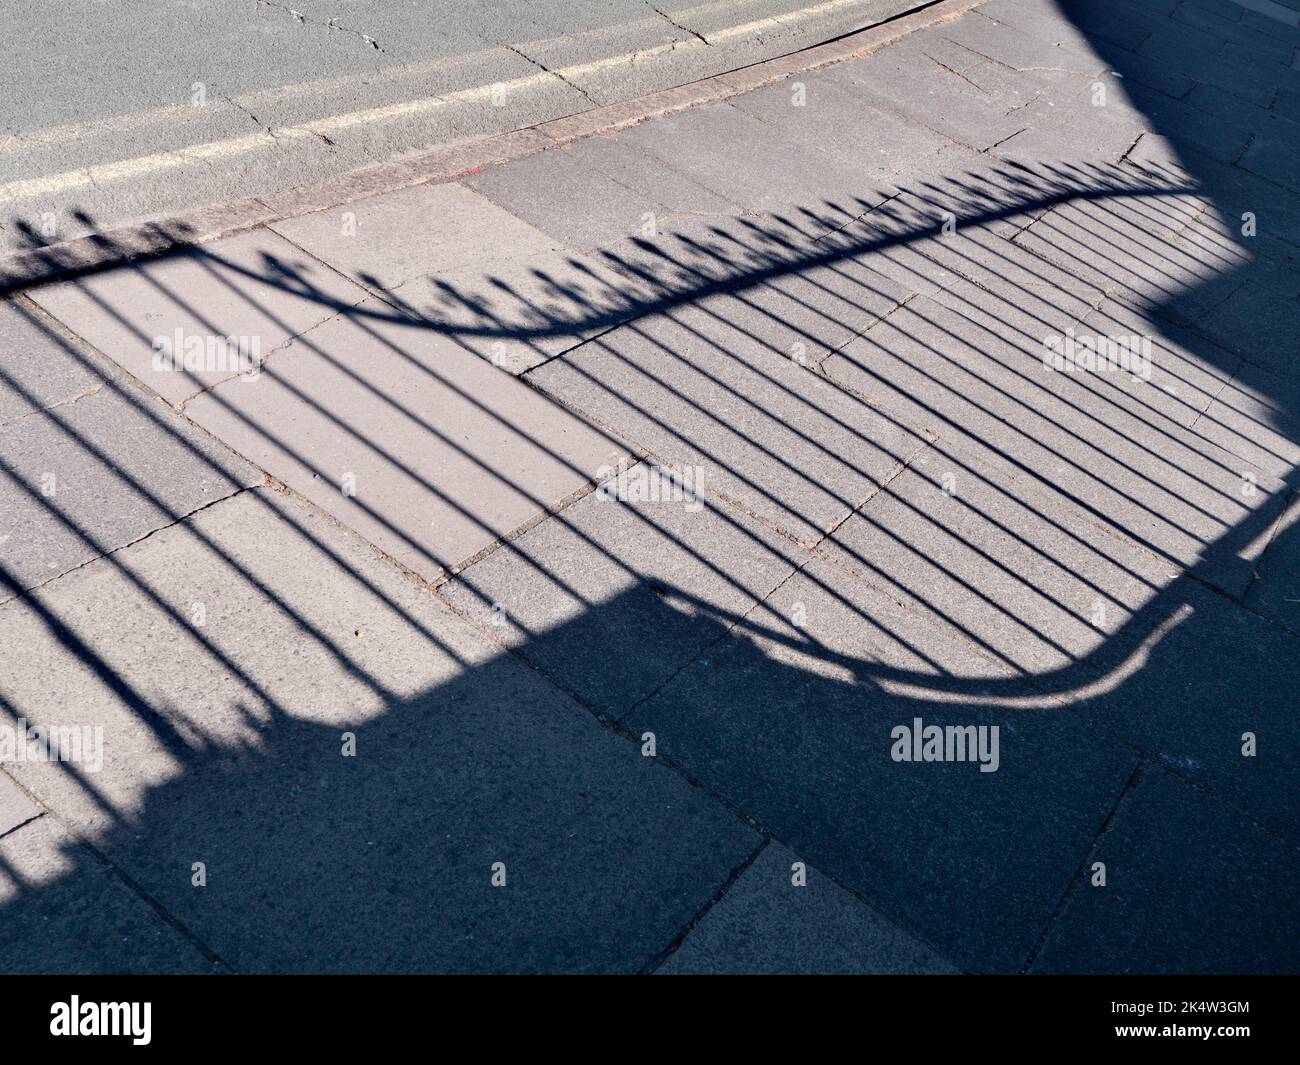 In the right time and place, even the everyday and ordinary can become fascinating. Take this abstract pattern on the pavement, the shadow of a decora Stock Photo